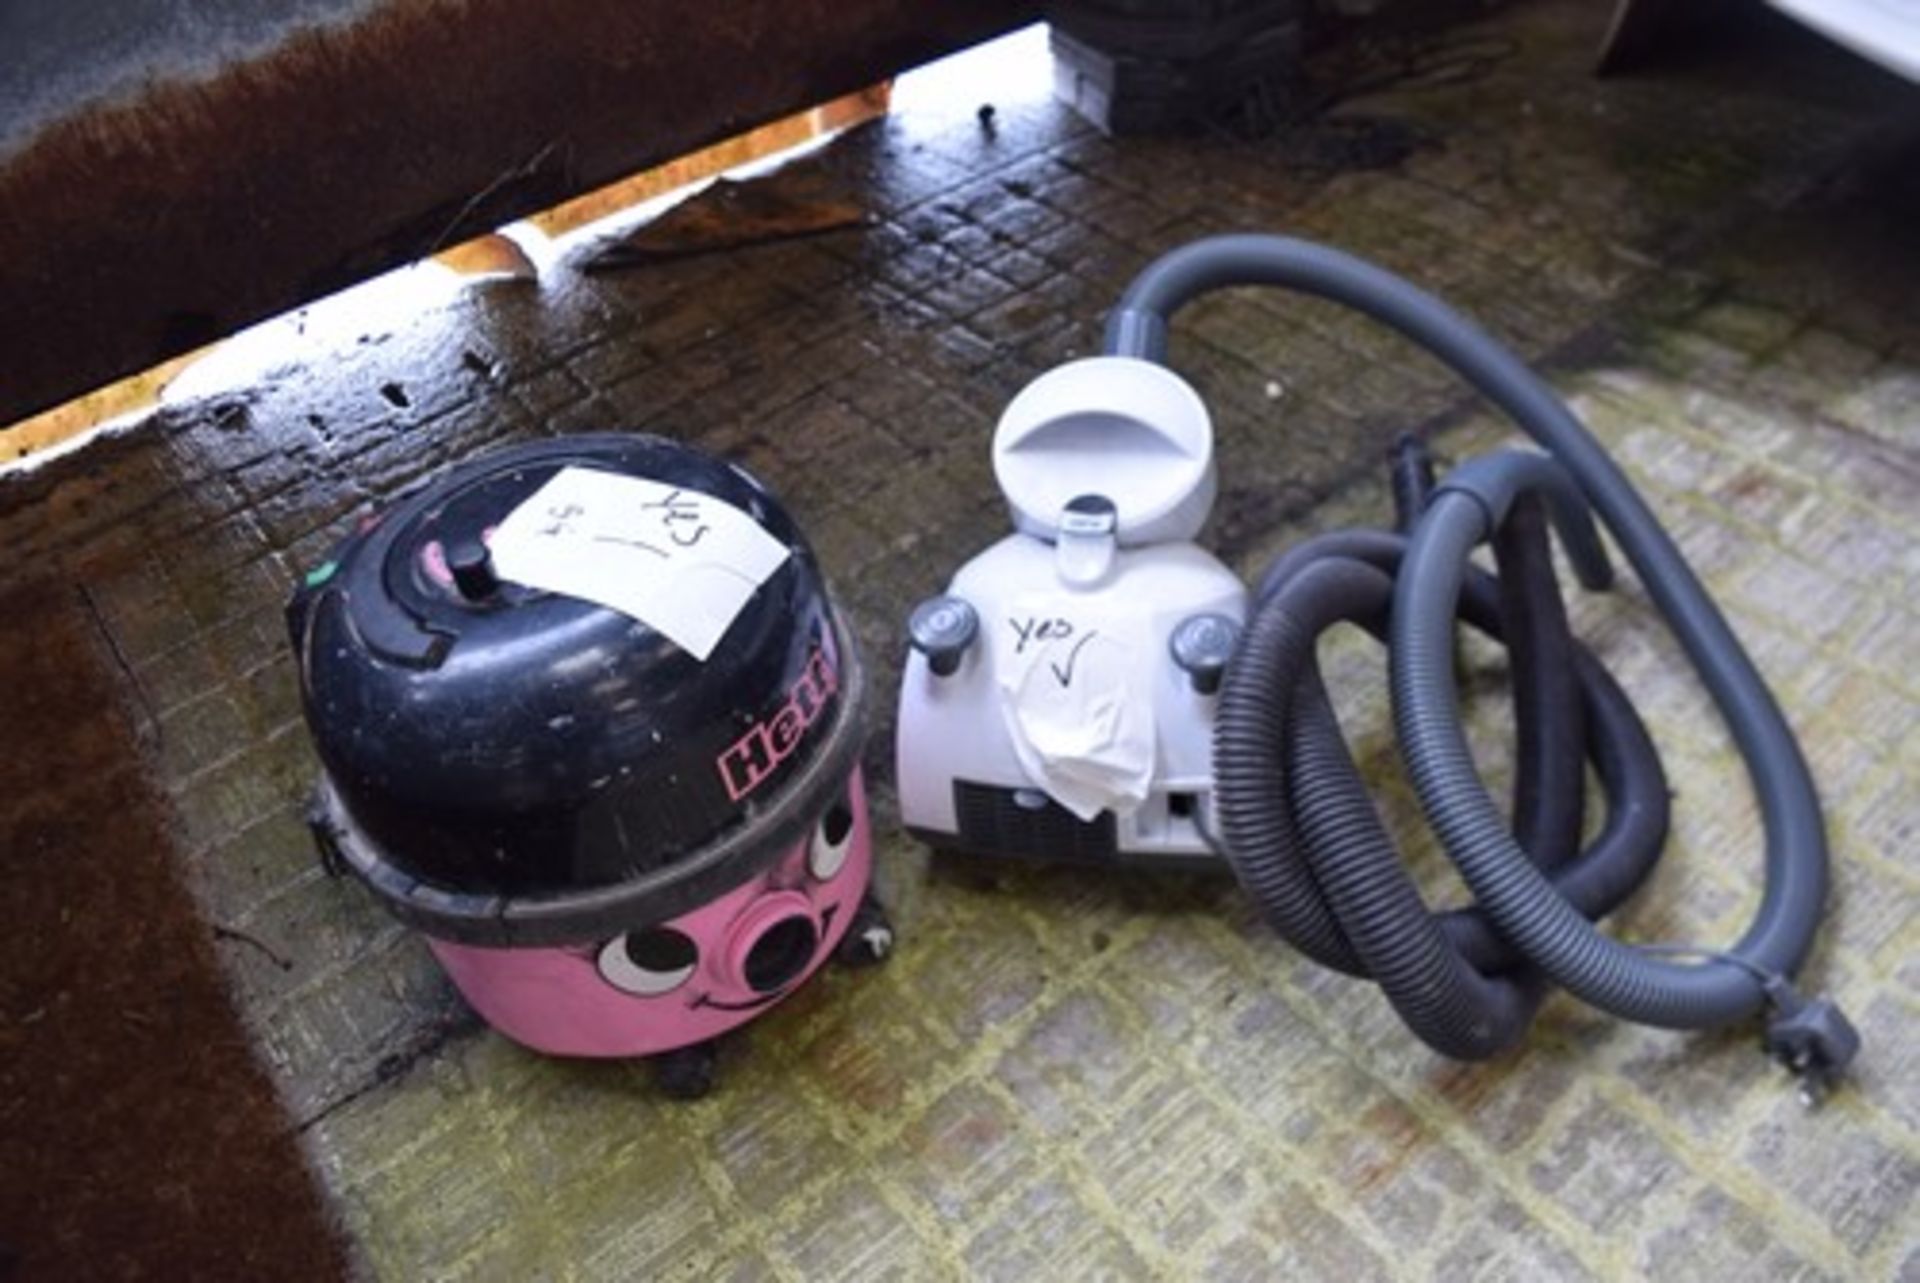 2 x vacuum cleaners 1 x Hetty, works but no pipes, together with 1 x Tesco bagless vacuum cleaner,